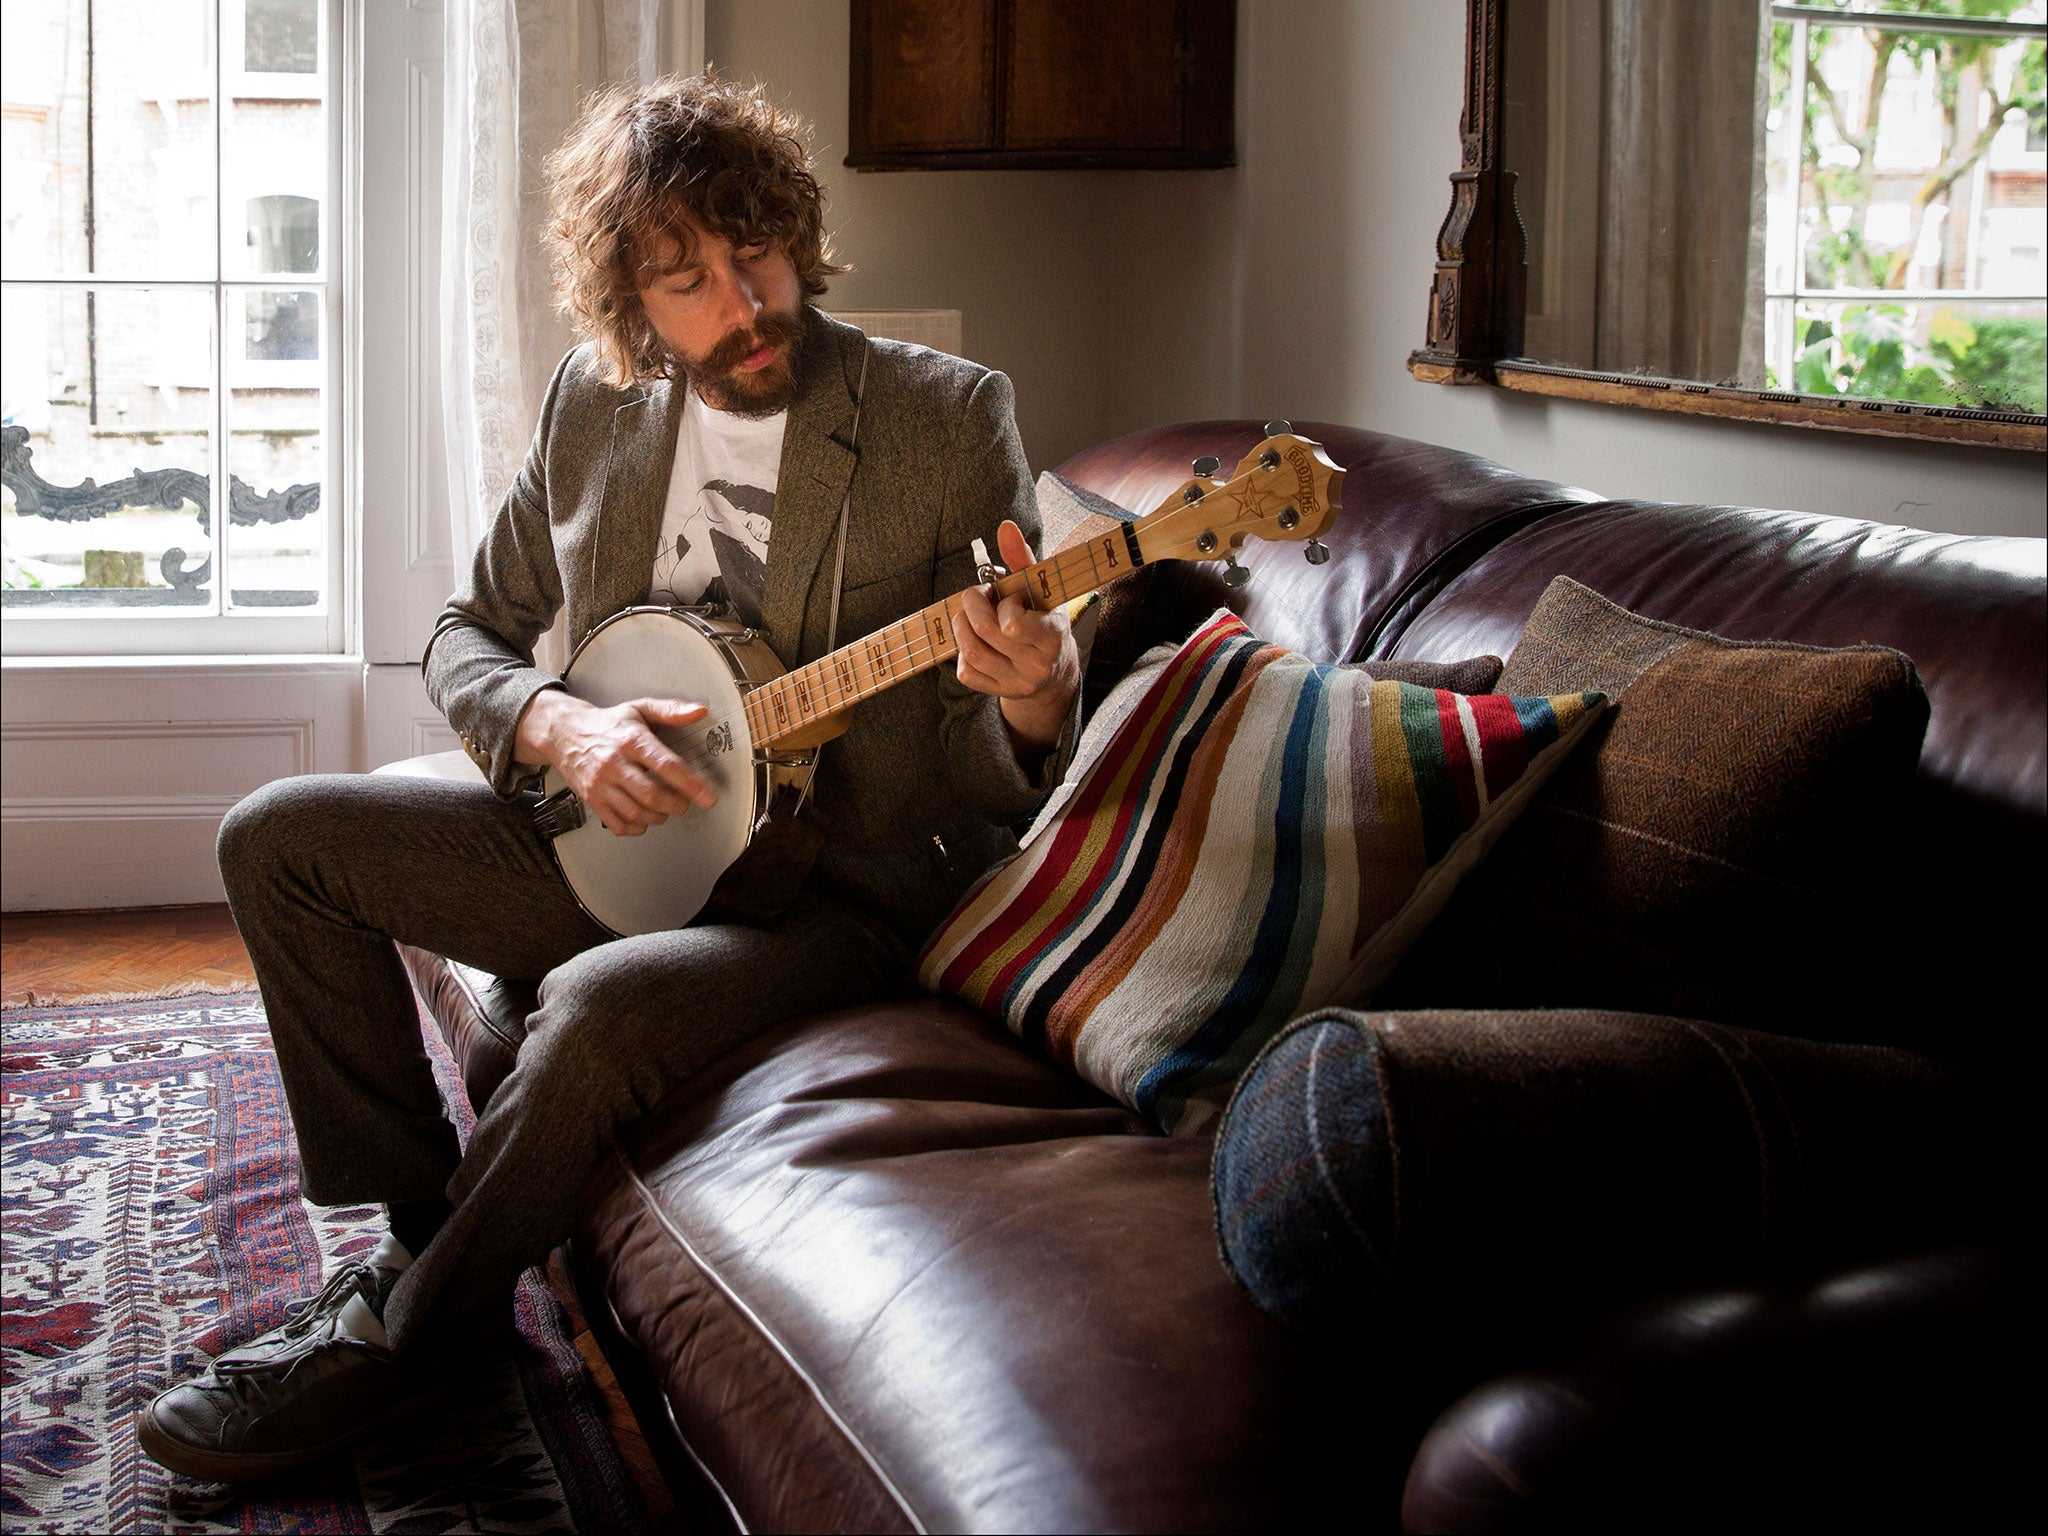 Johnny Borrell, frontman of the band Razorlight and now a solo artist